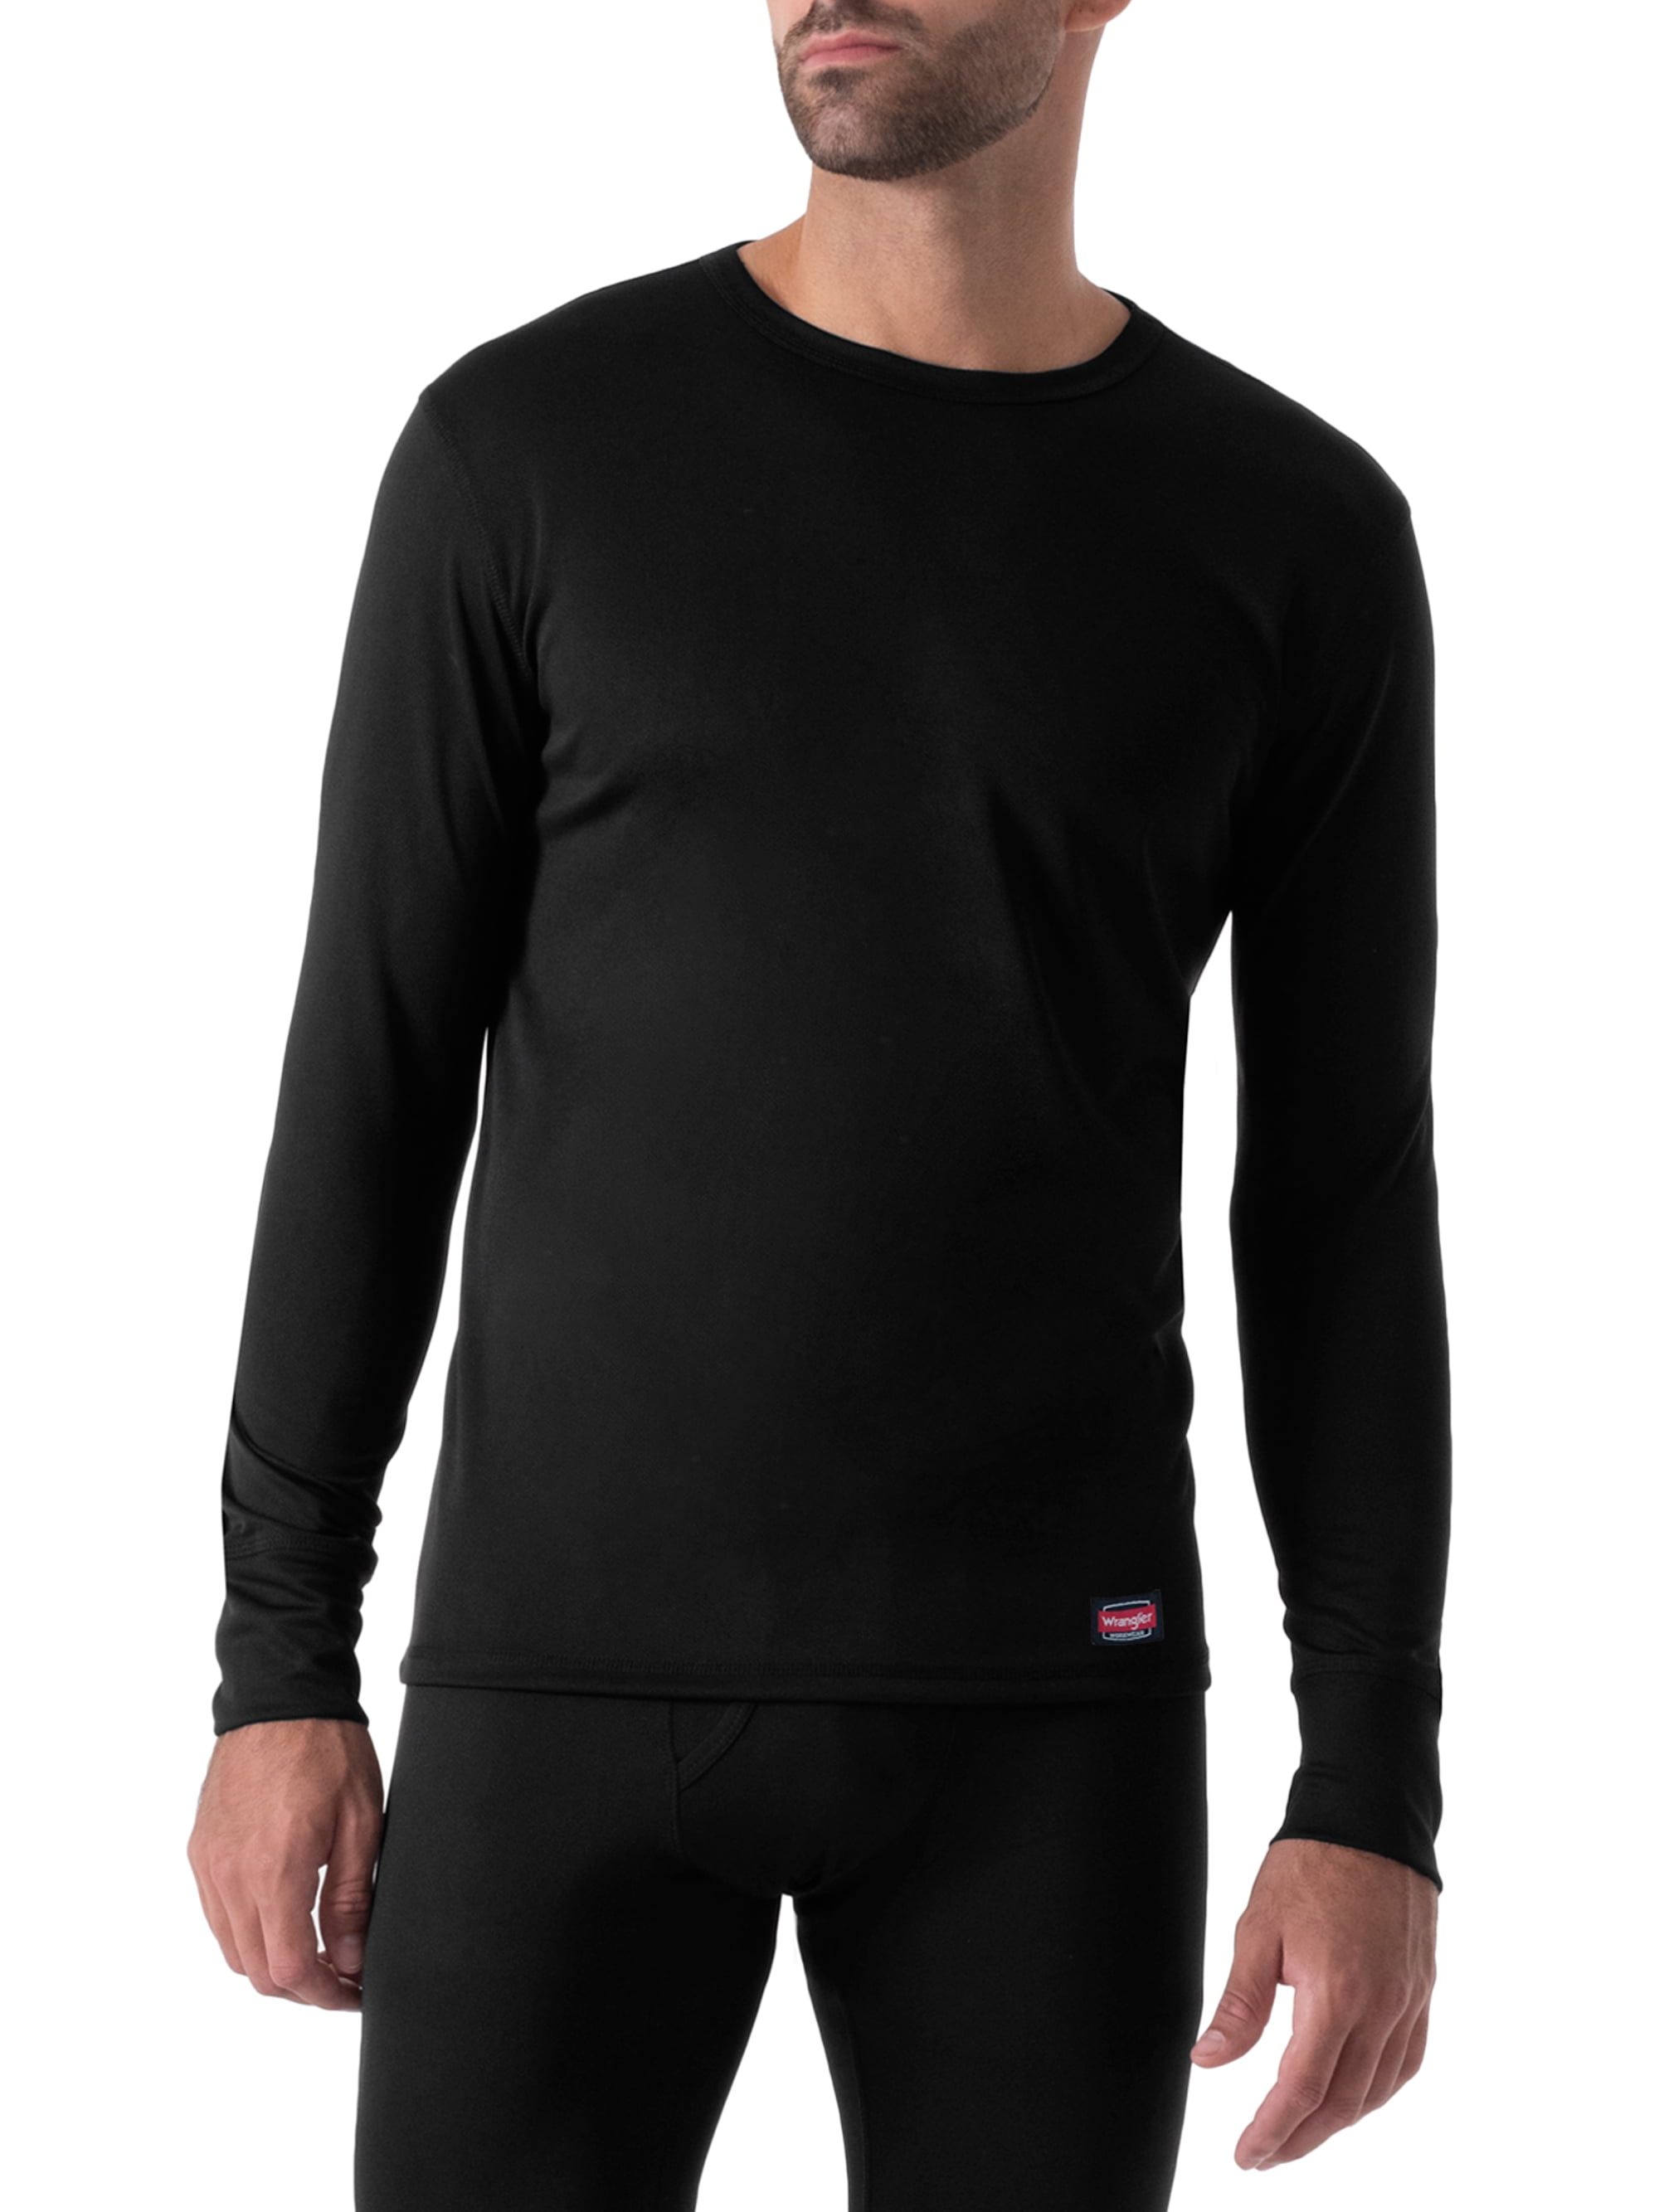 Reebok Men's COLD WEATHER Crew Neck Long Sleeve Base Layer Shirt Small 34-36 